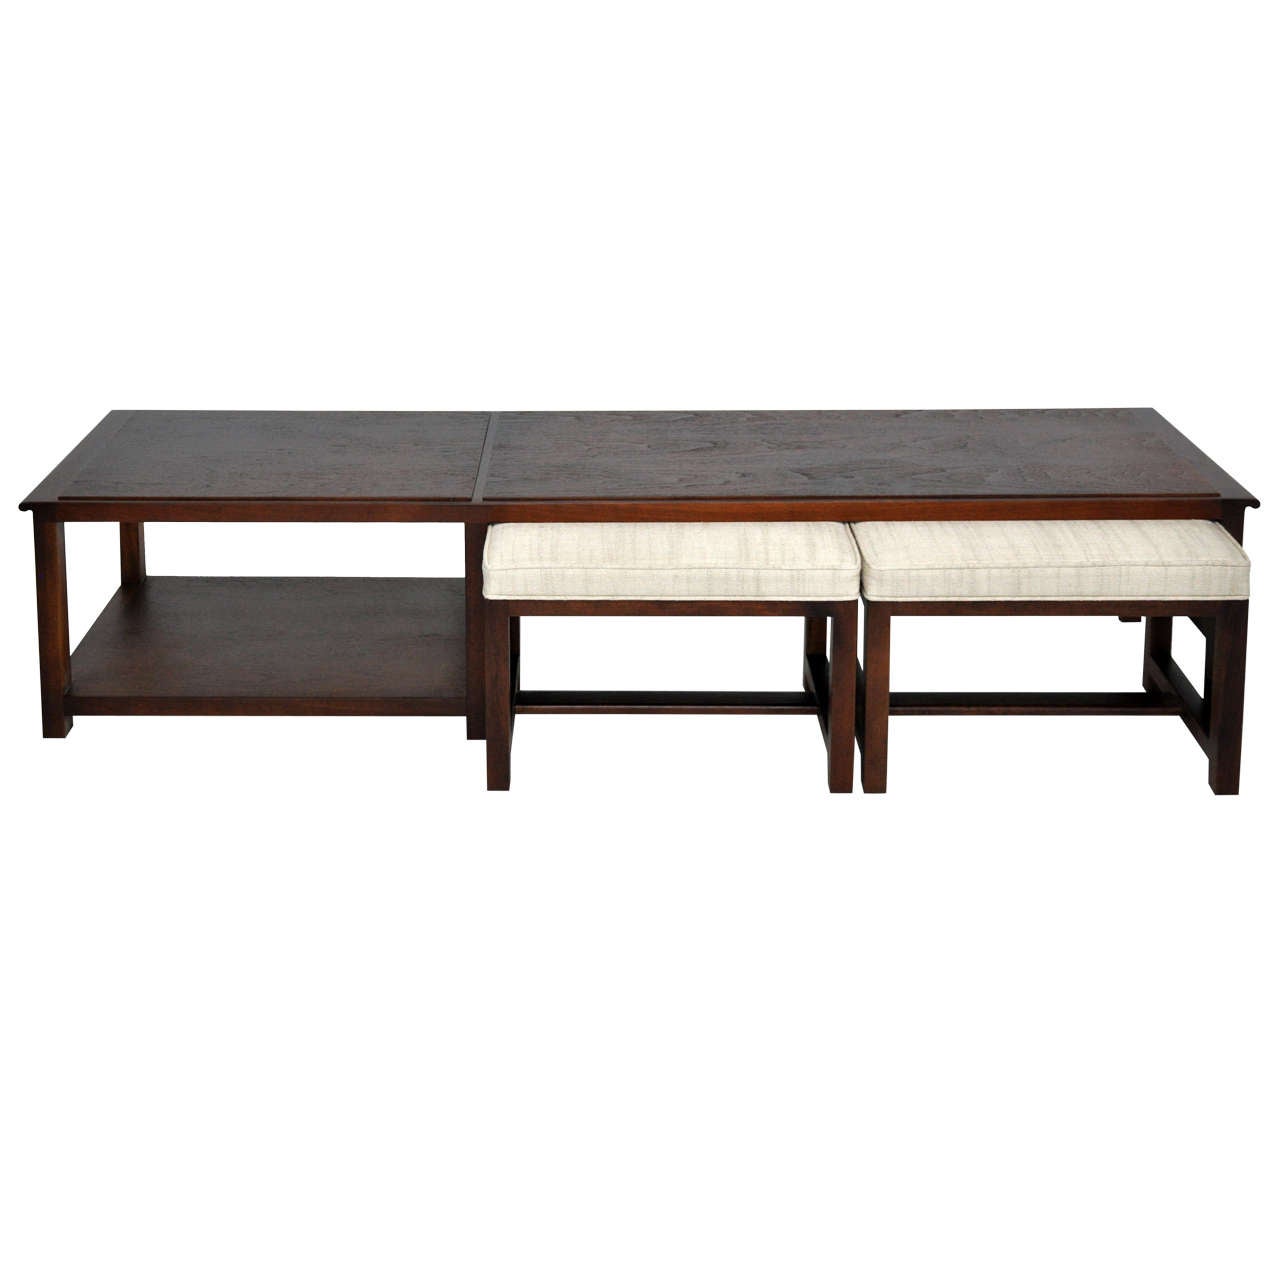 Dunbar Coffee Table with Stools by Edward Wormley